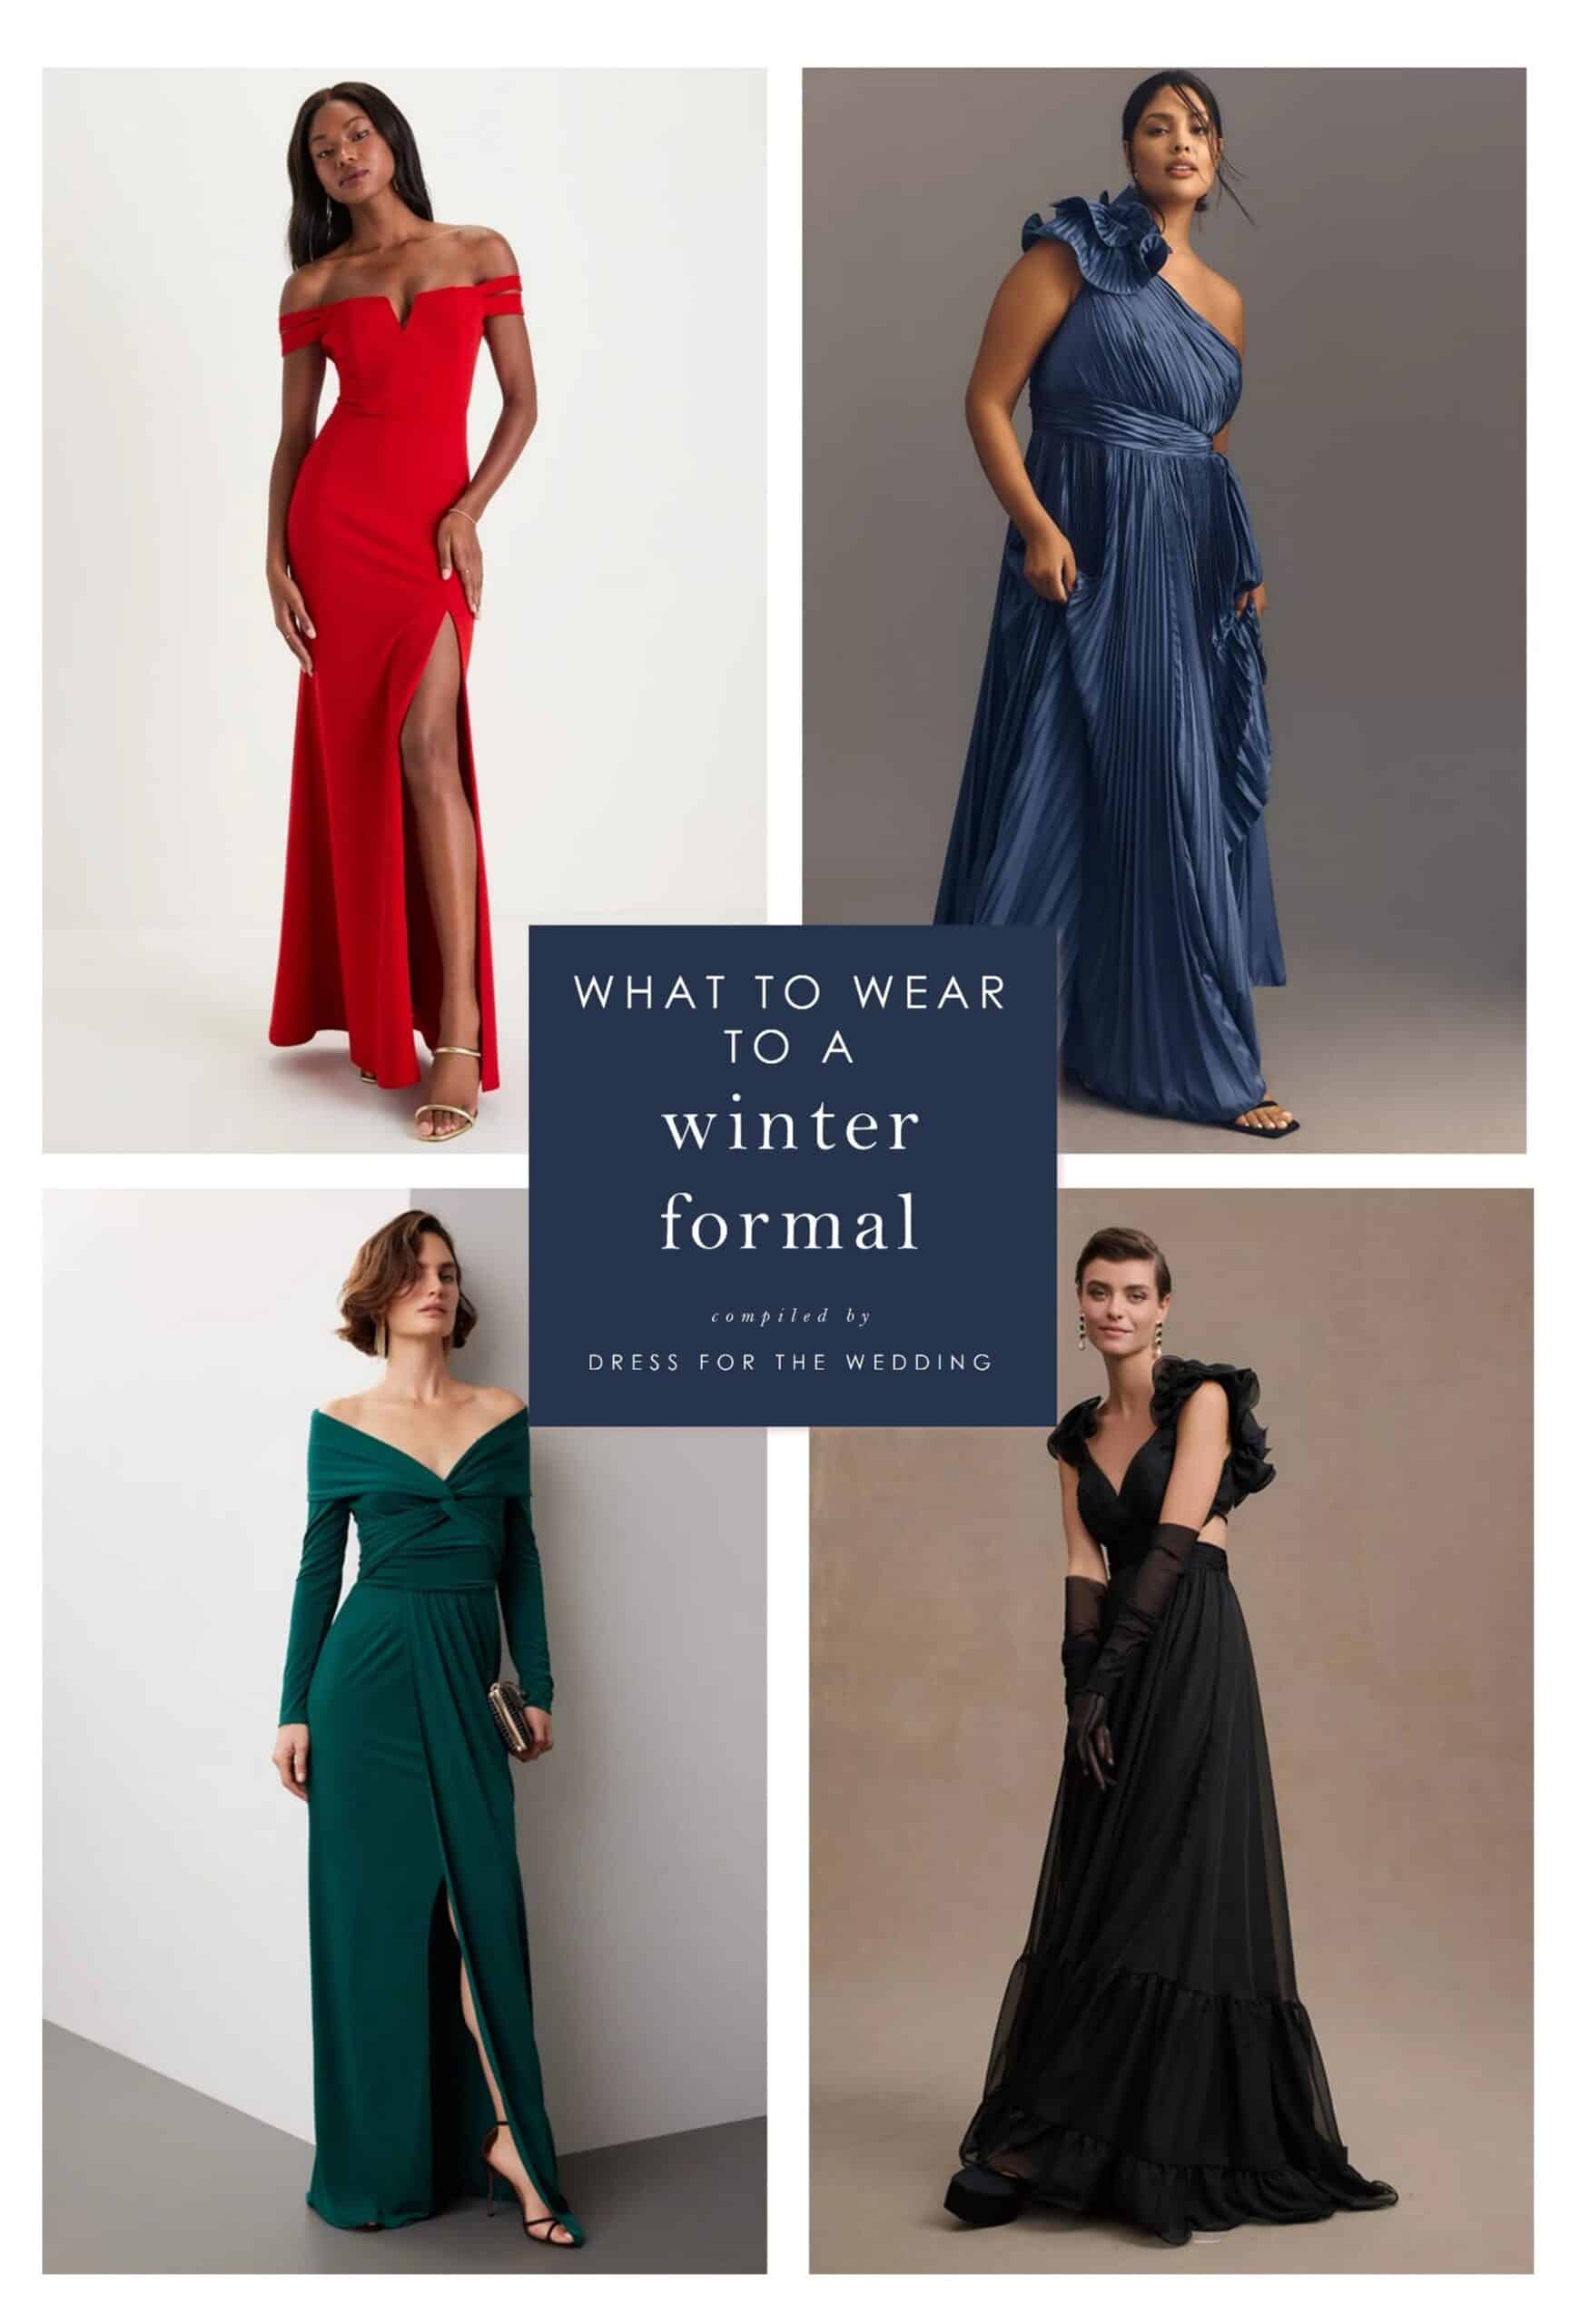 What to Wear to a Winter Formal Wedding or Event - Dress for the